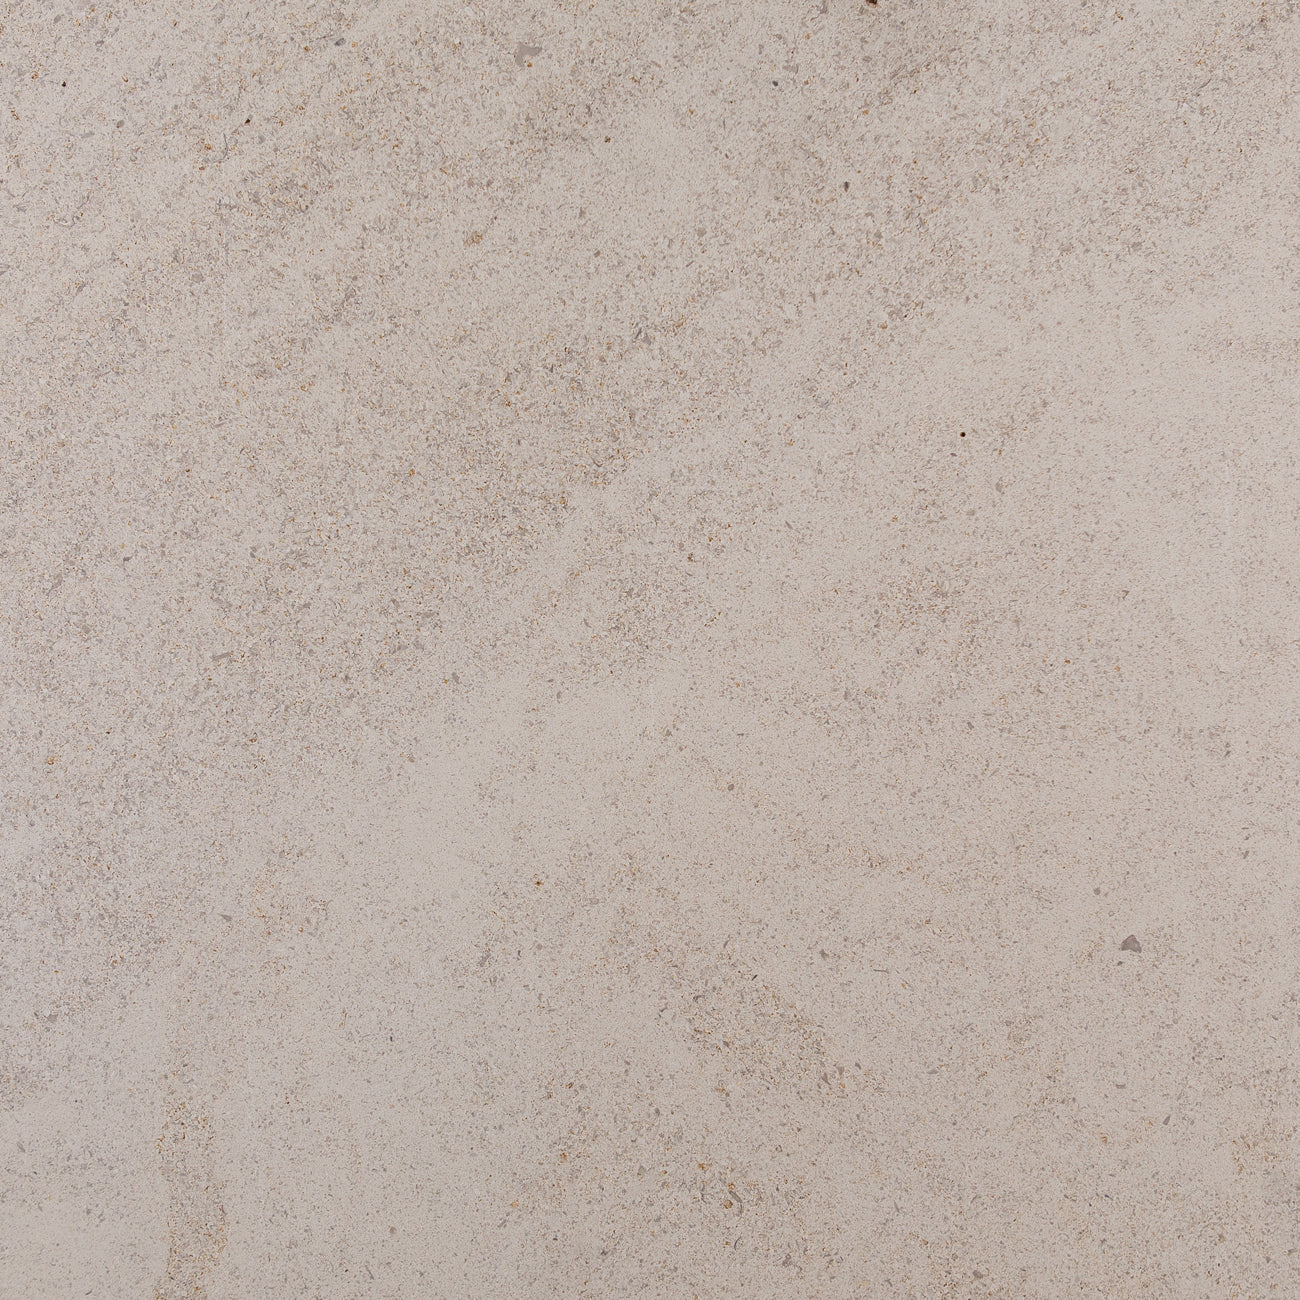 saint marc limestone gray stone tile  sold by surface group